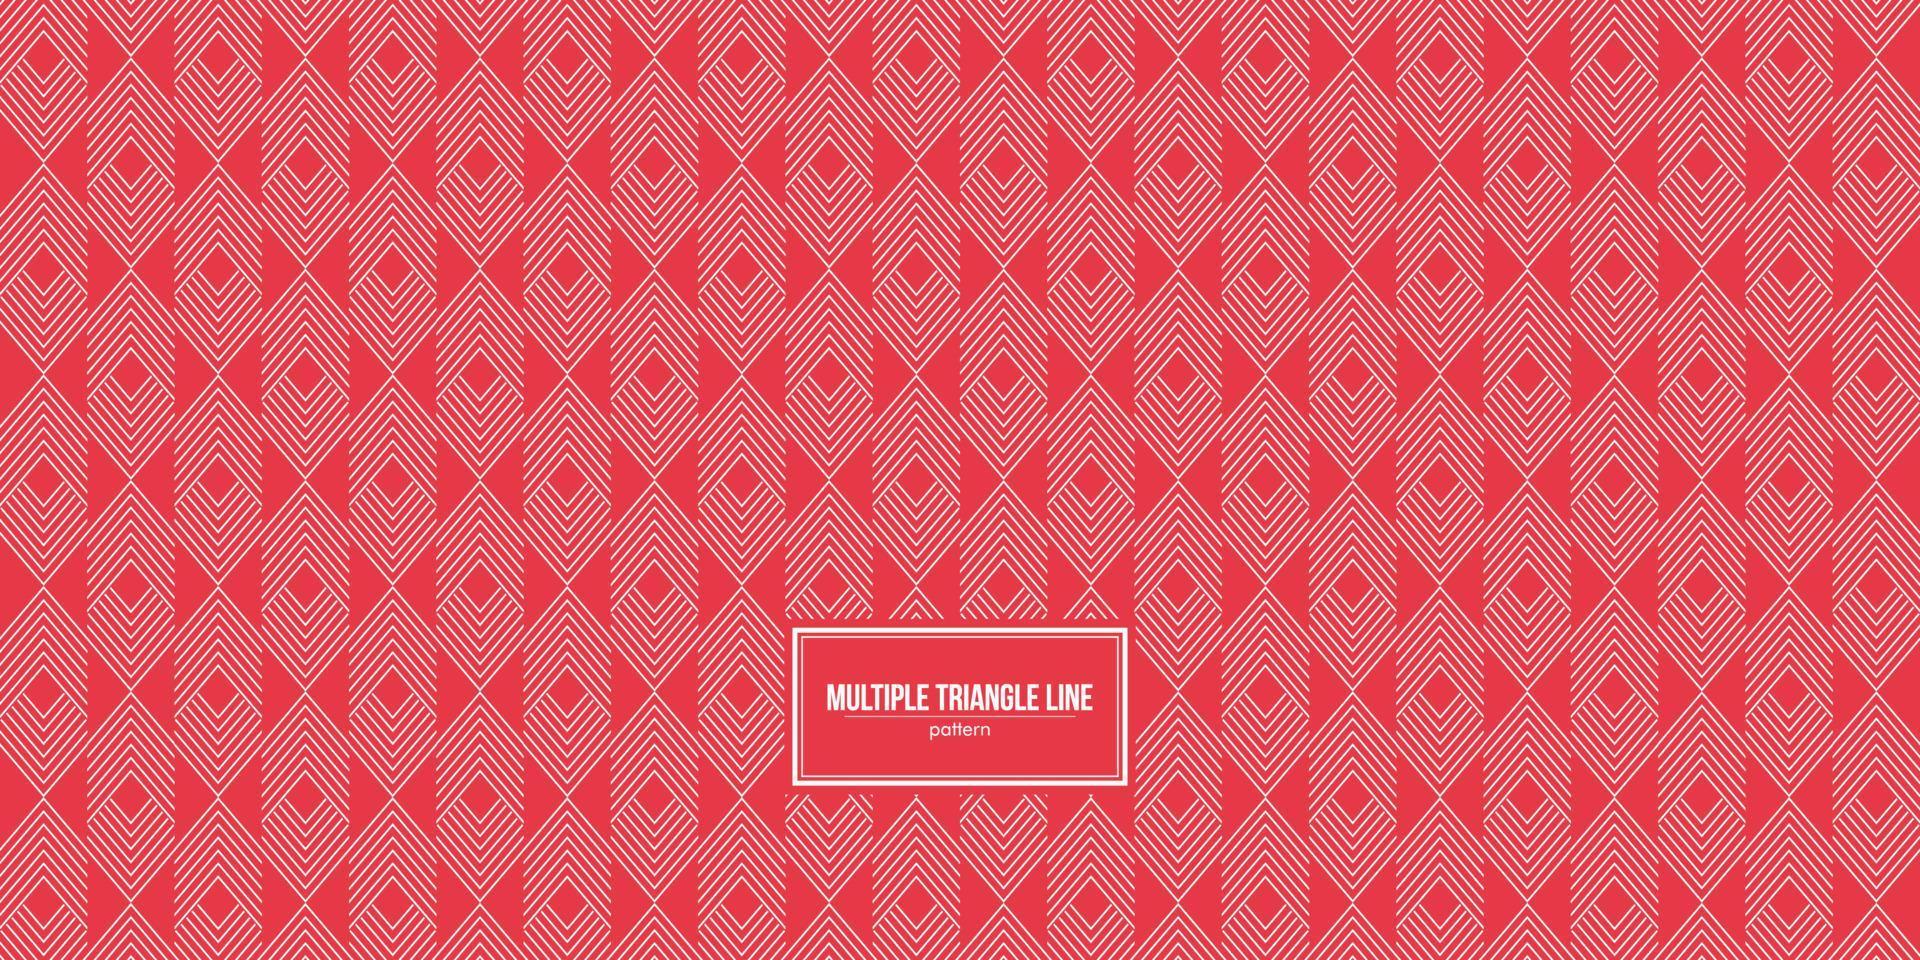 multiple triangle line pattern with red background vector